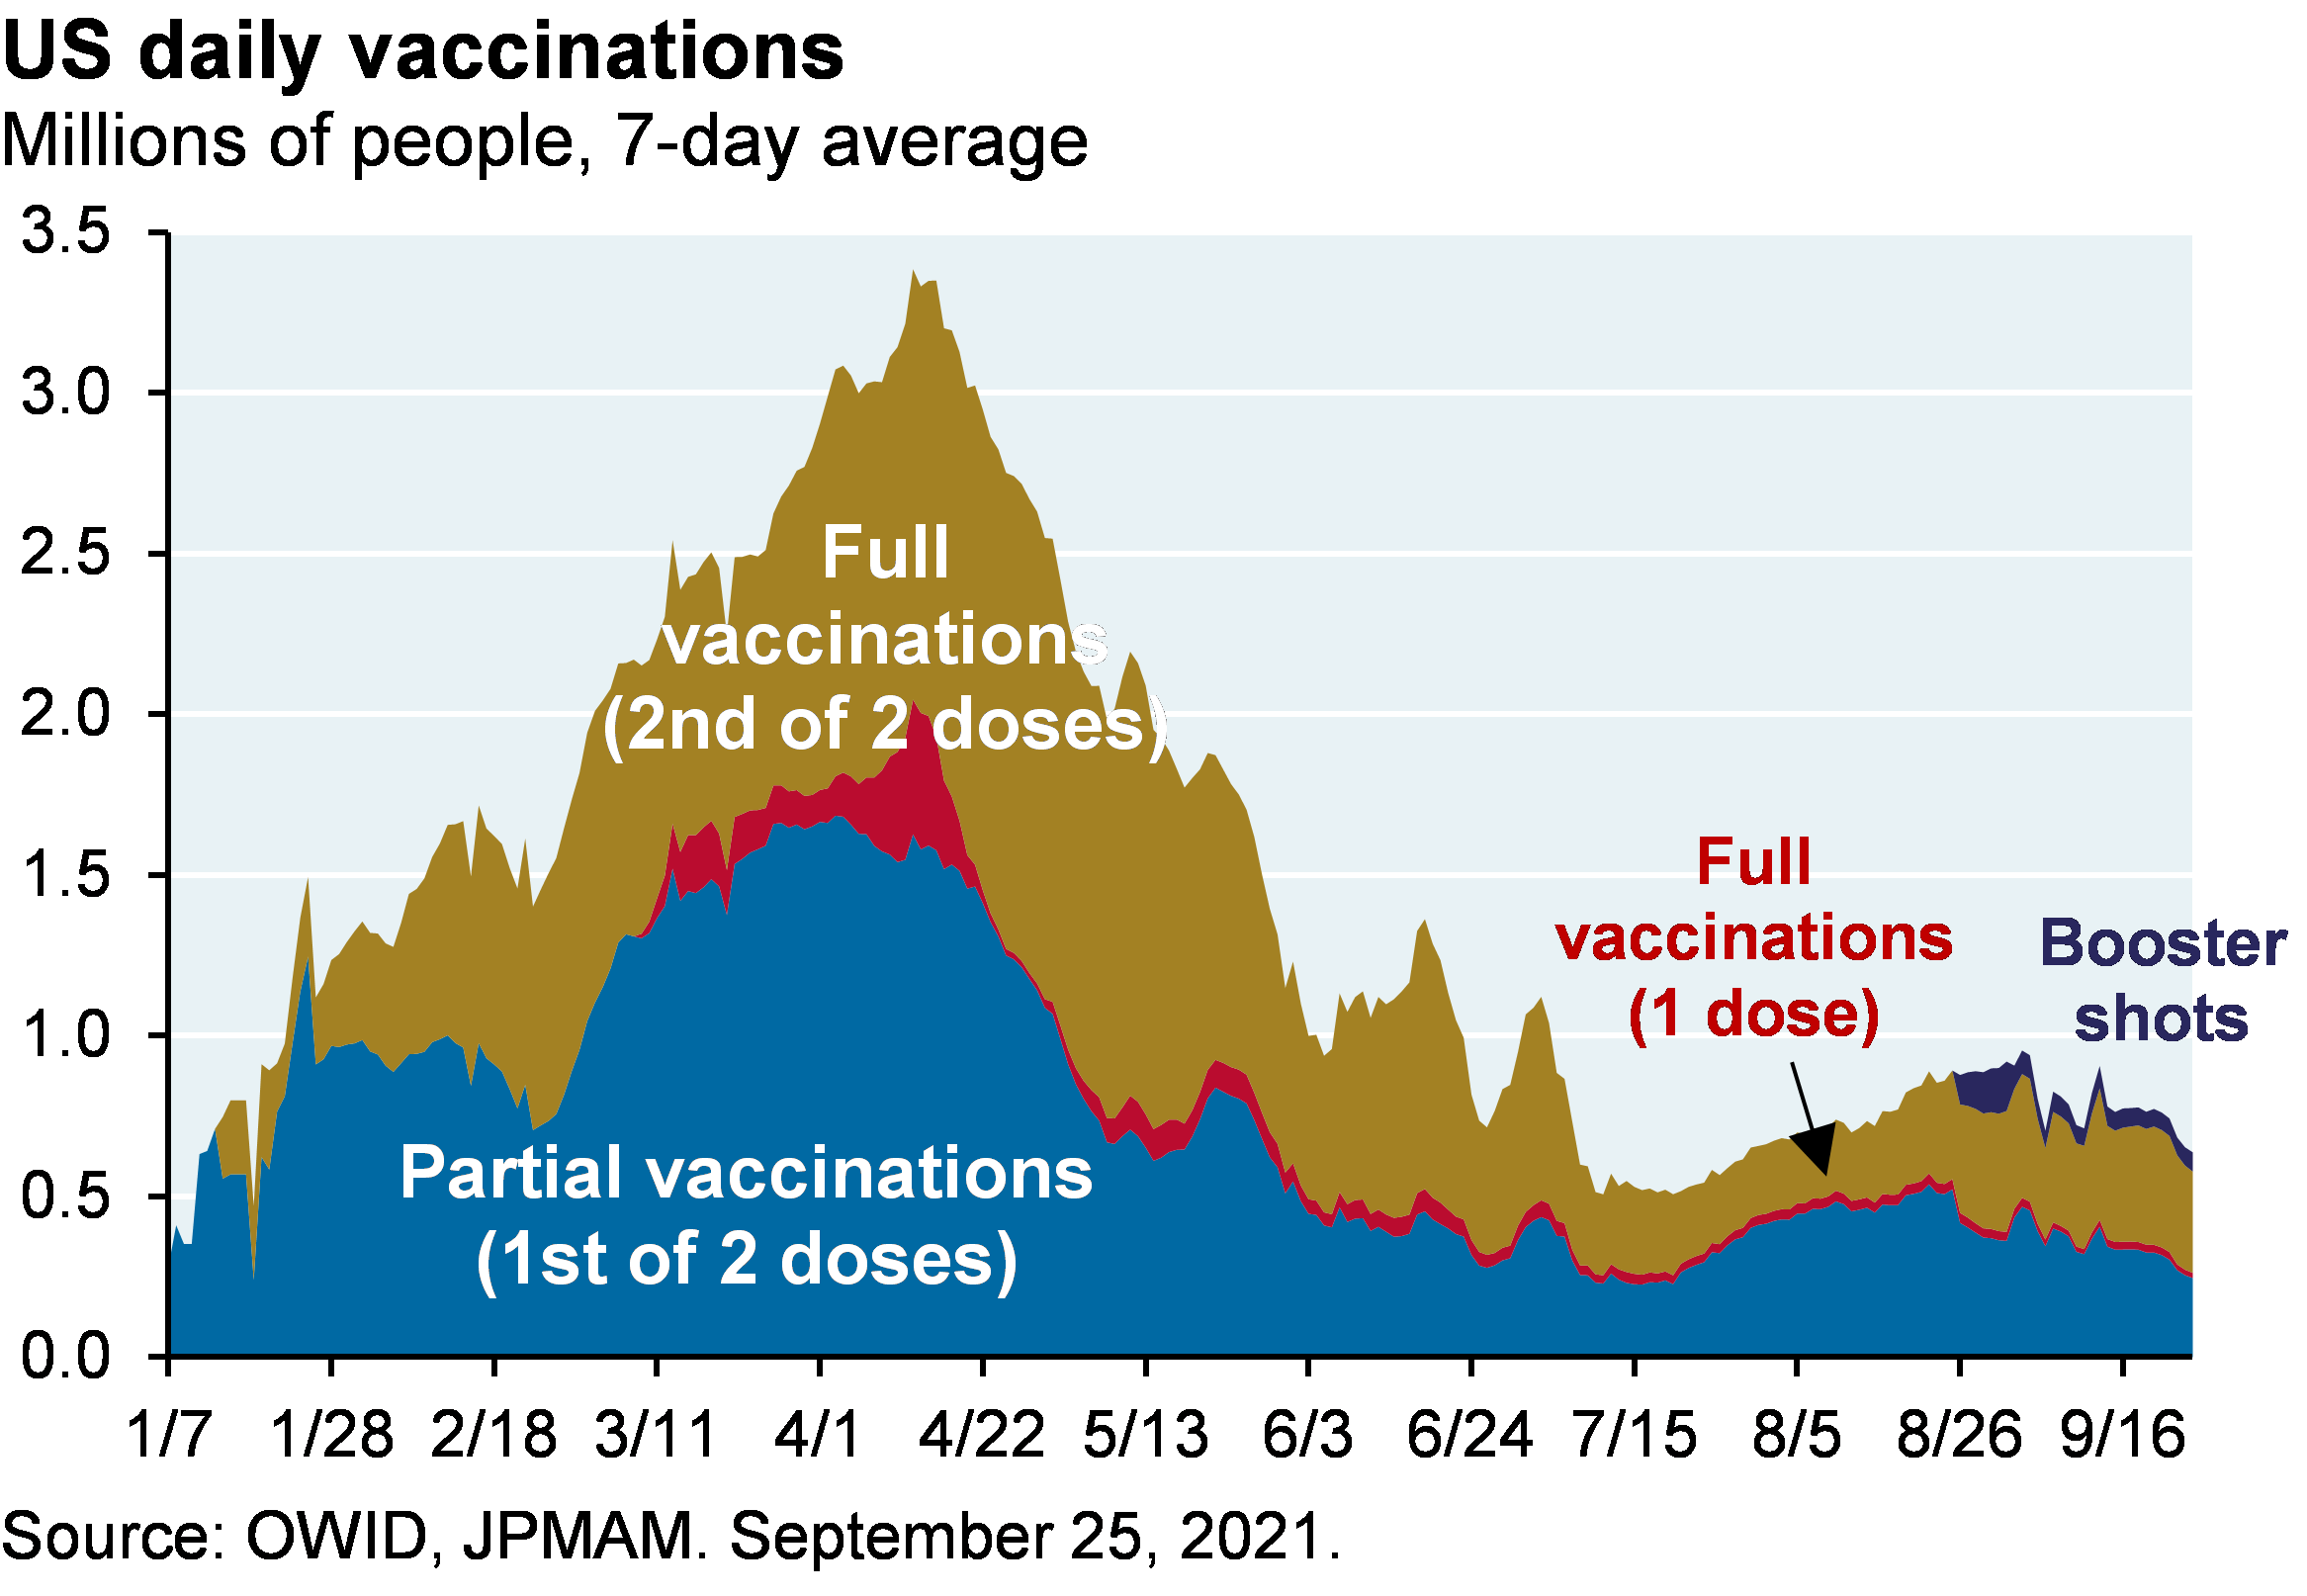  Area chart shows partial, 1-dose full, 2-dose full, and booster dose US daily vaccinations. At the April peak, about 3.3 million people were getting vaccinated a day. More recently, about 500k people are getting vaccinated a day, split evenly between partial and full vaccinations, with a small portion of doses going to booster shots and 1-dose vaccinations.